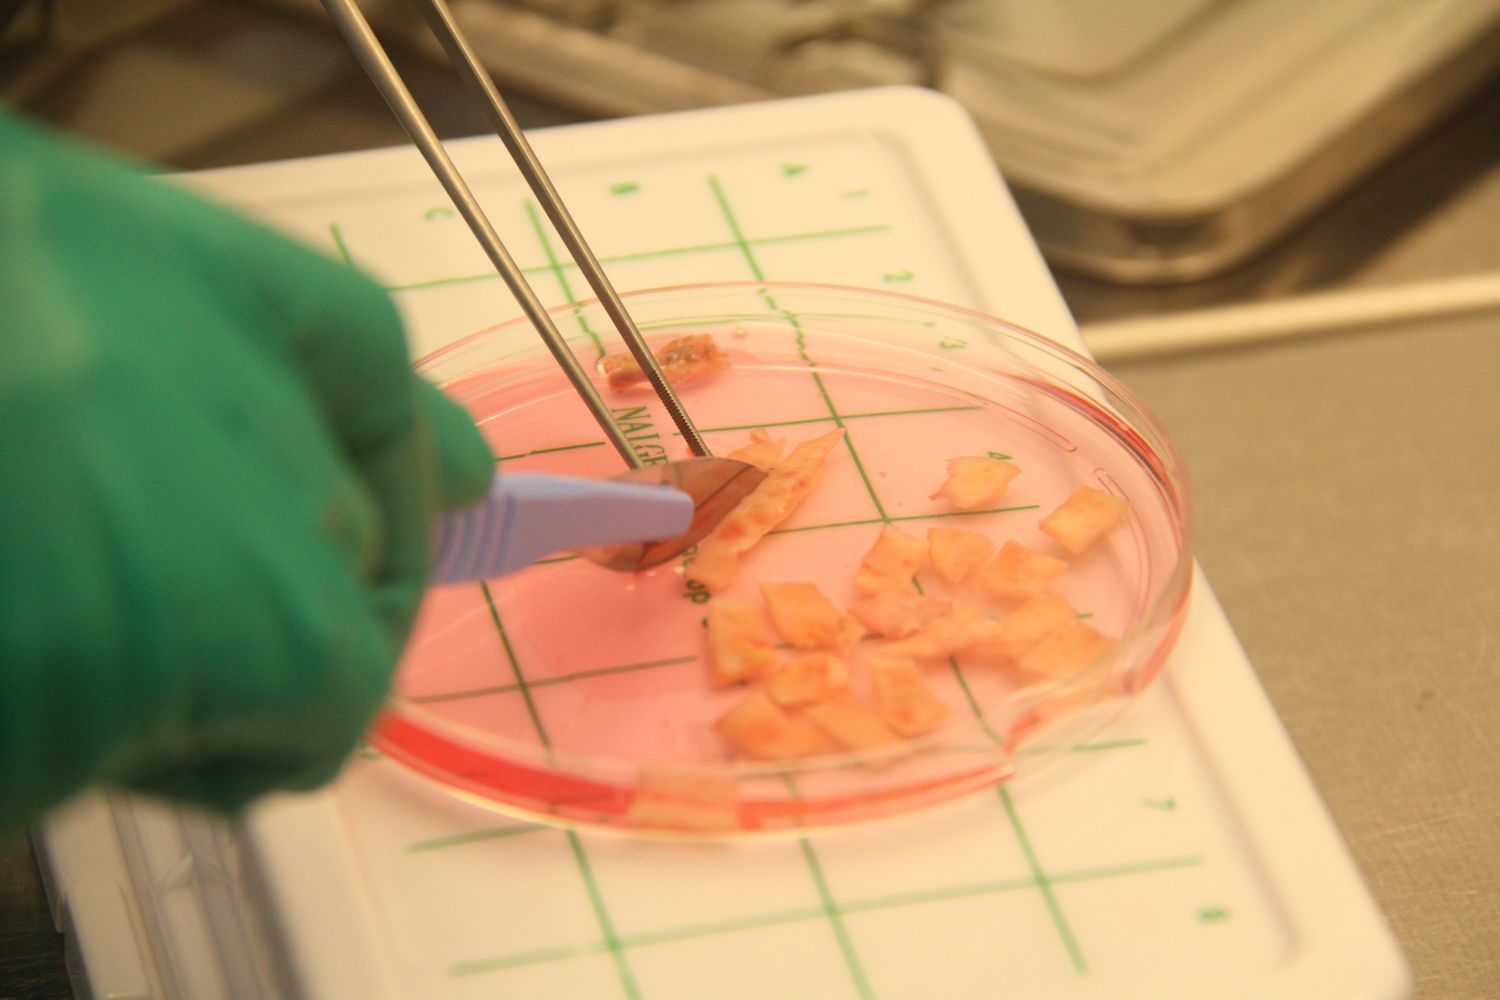 Processing ovarian tissue in the lab of the fertility clinic of the UZ Brussel Hospital